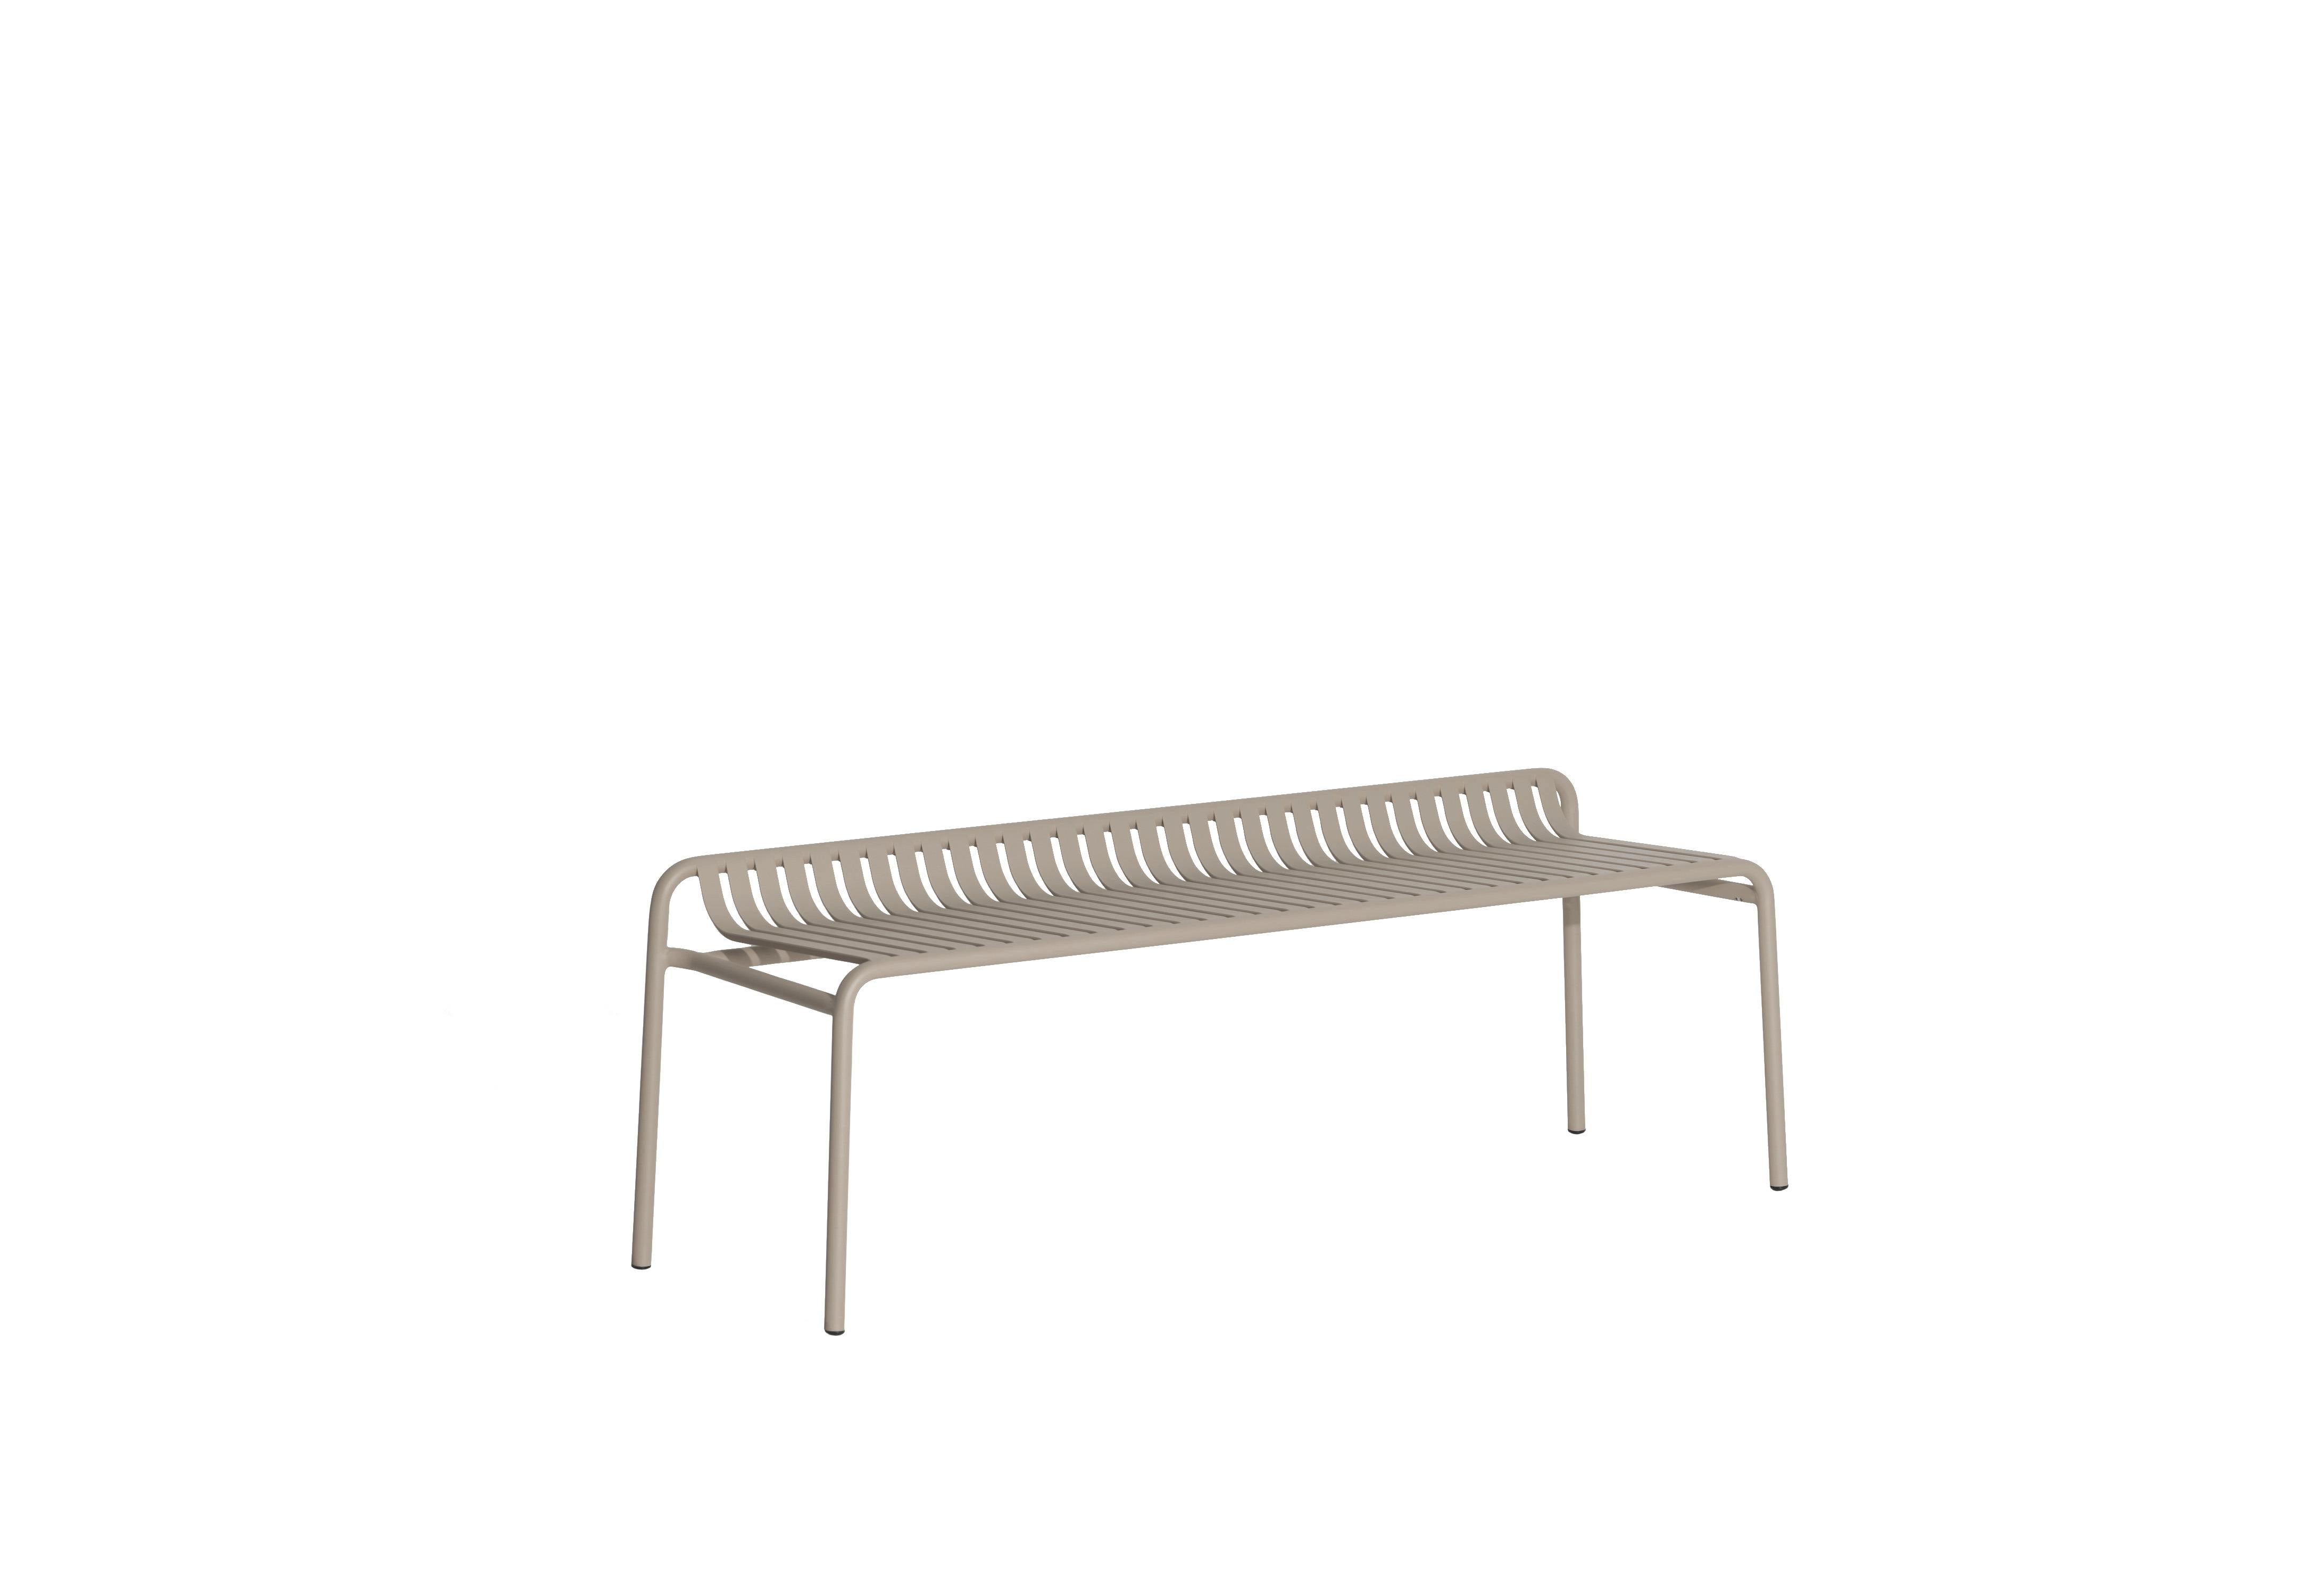 Petite Friture Week-End Bench without Back in Dune Aluminium by Studio BrichetZiegler, 2017

The week-end collection is a full range of outdoor furniture, in aluminium grained epoxy paint, matt finish, that includes 18 functions and 8 colours for